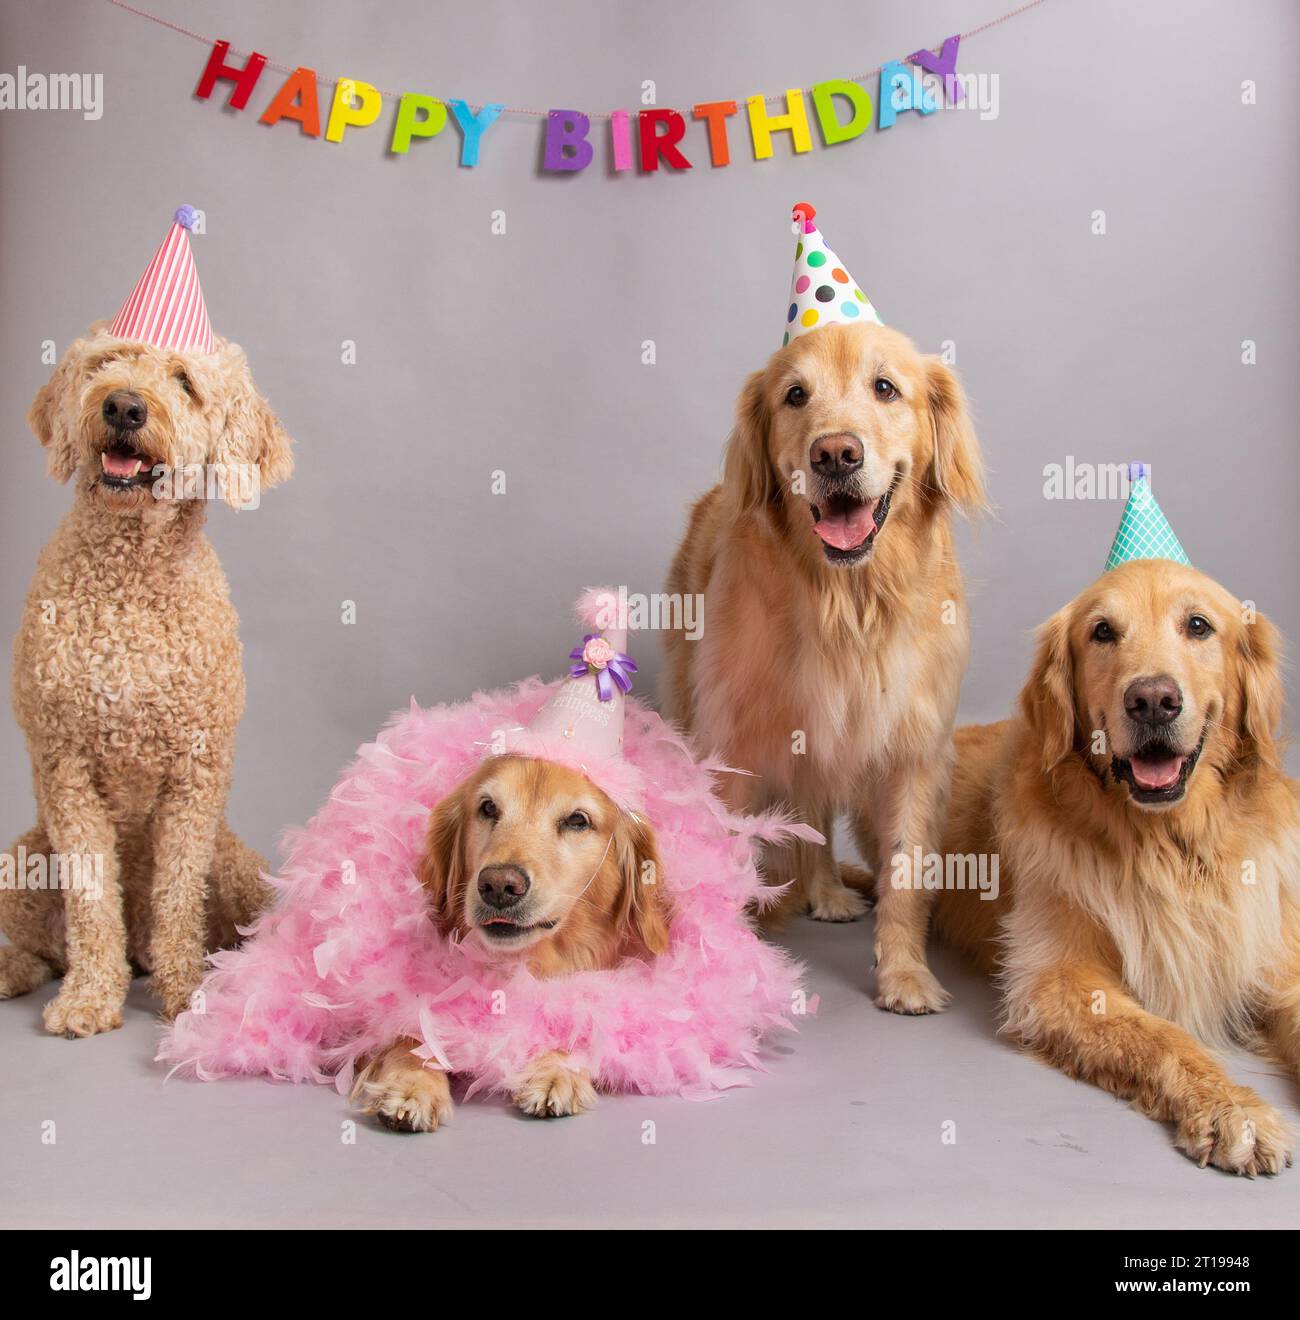 Golden retrievers and a labradoodle sitting under a Happy Birthday banner wearing party hats Stock Photo